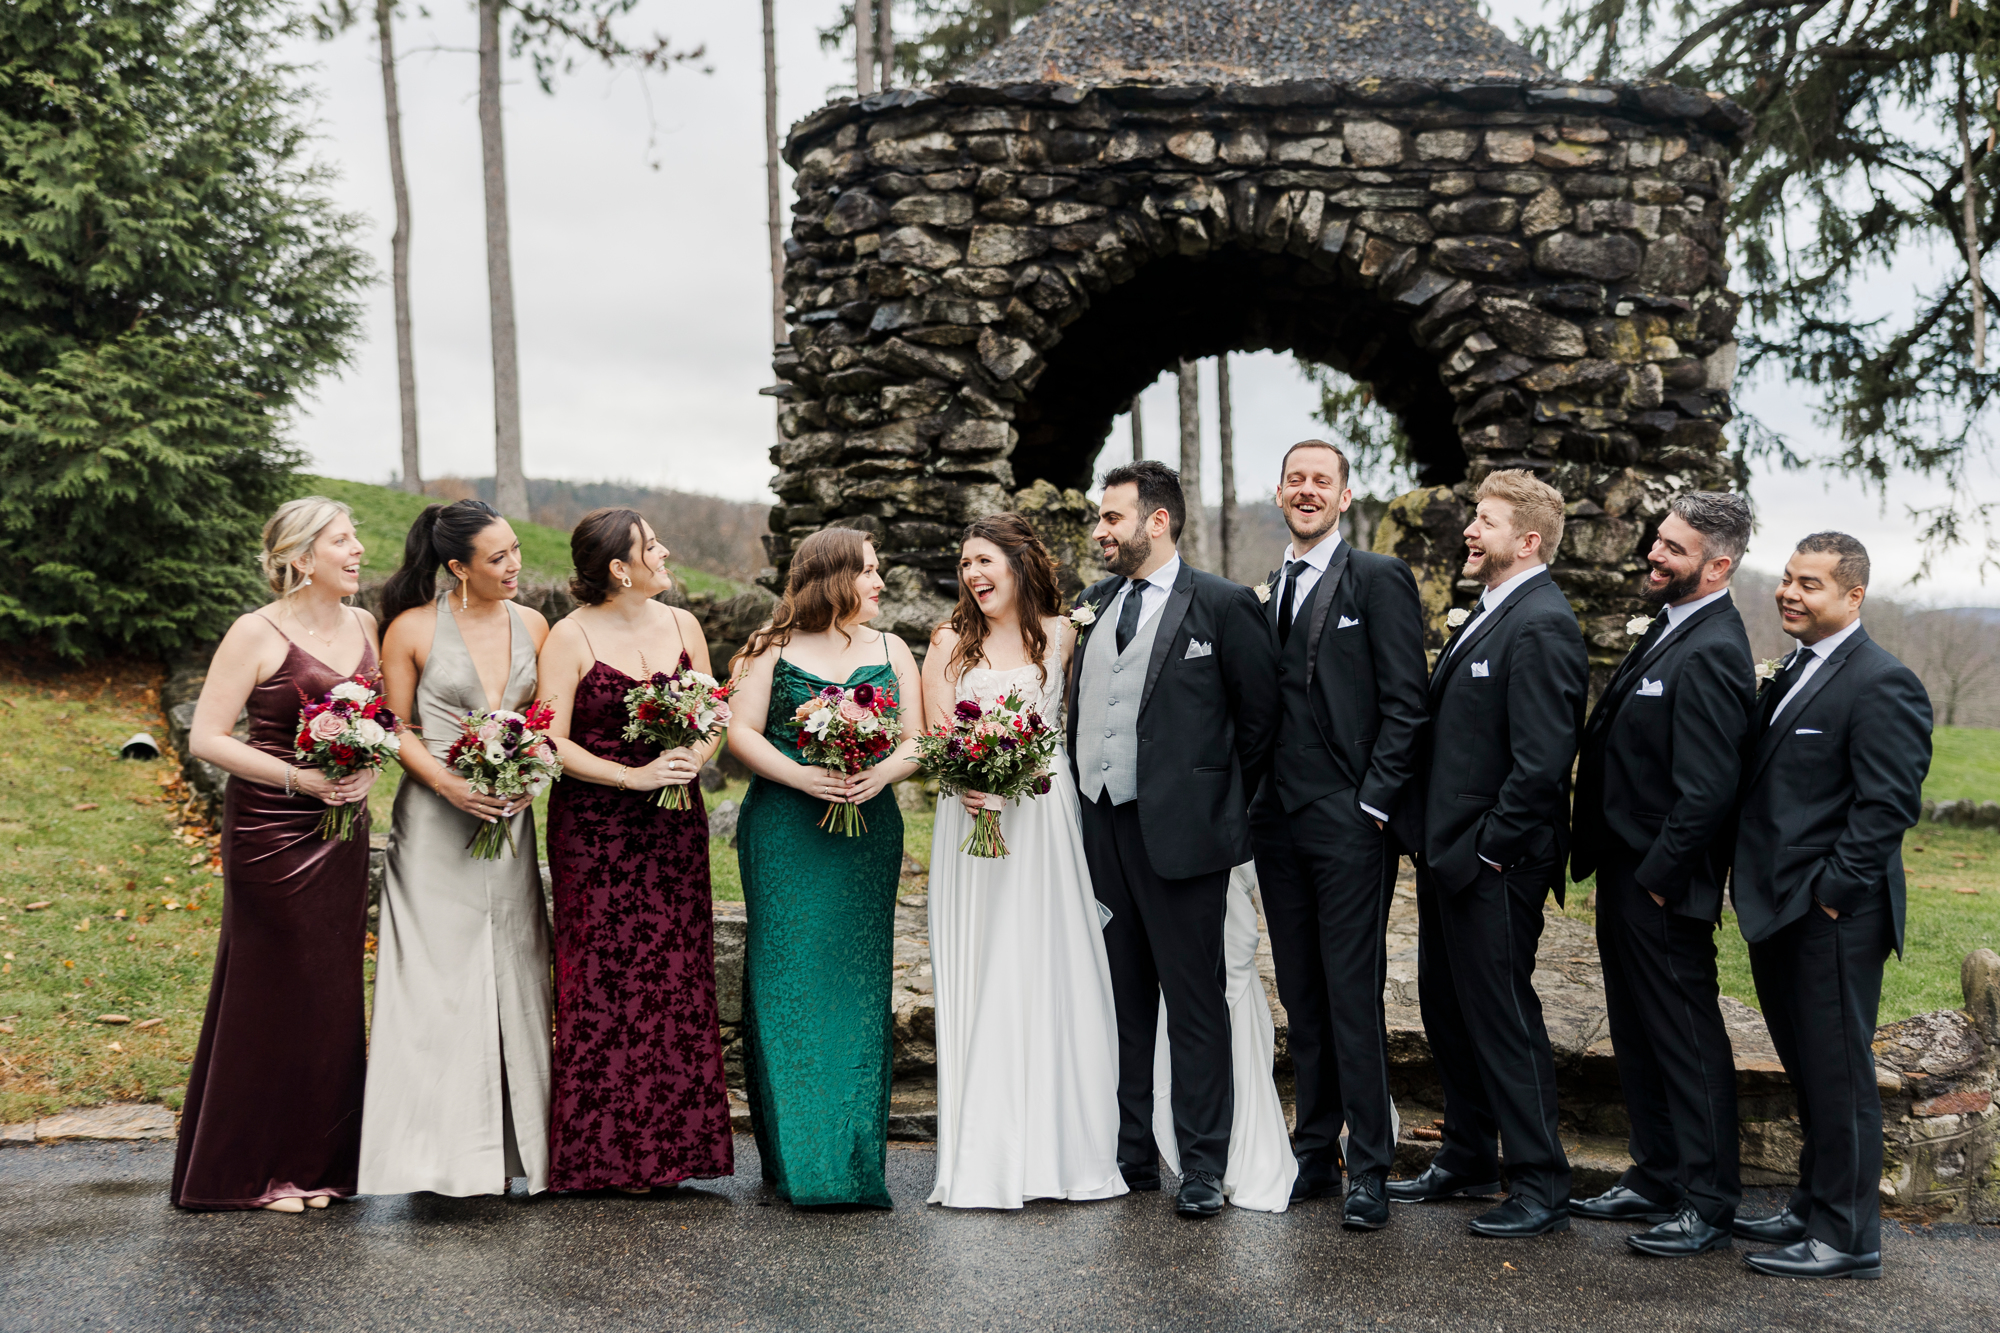 Flawless wedding photography at The Garrison, NY